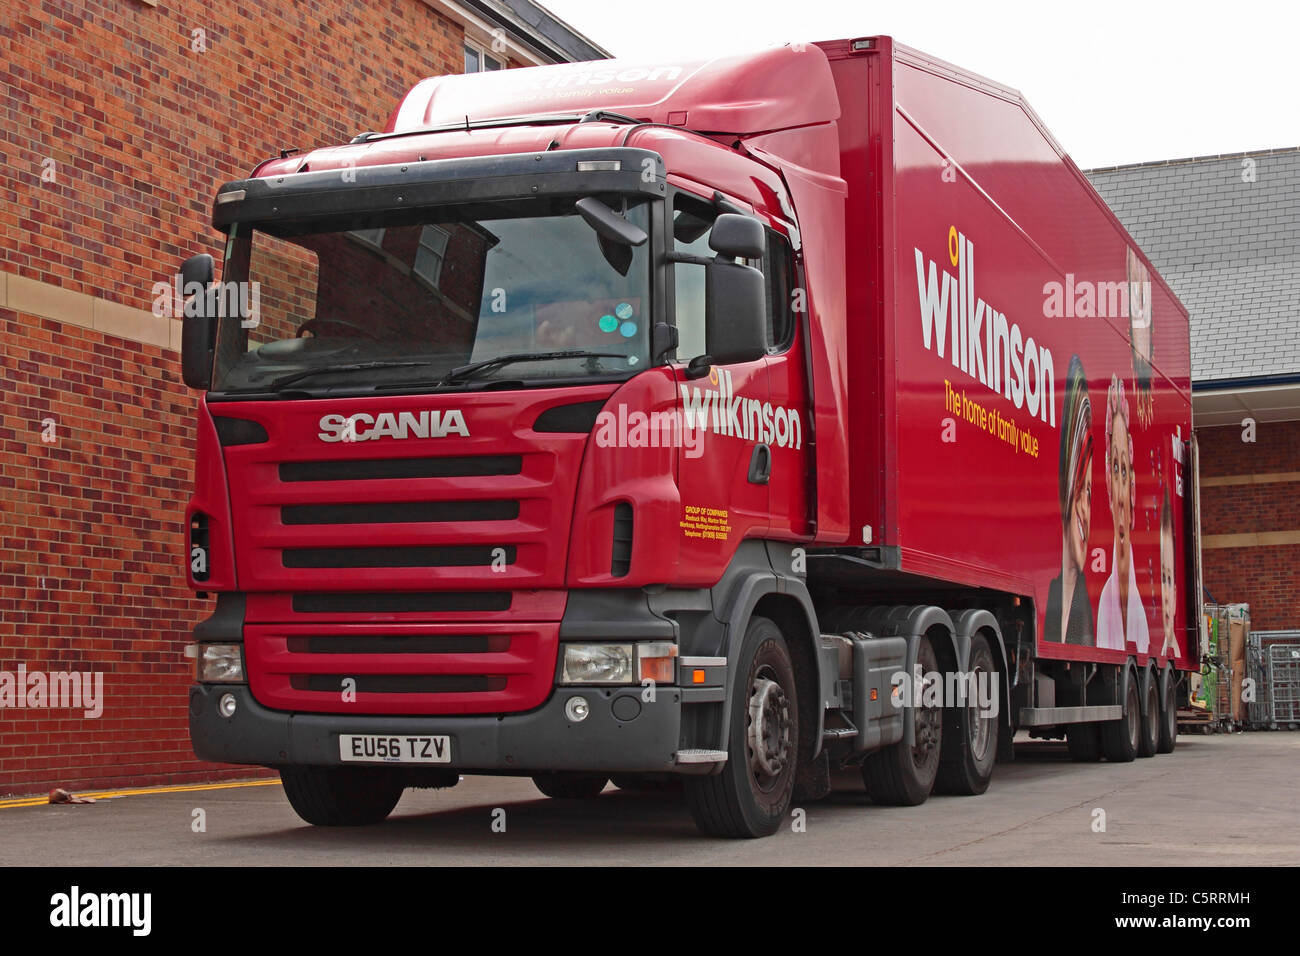 Wilkinson articulated delivery lorry Stock Photo